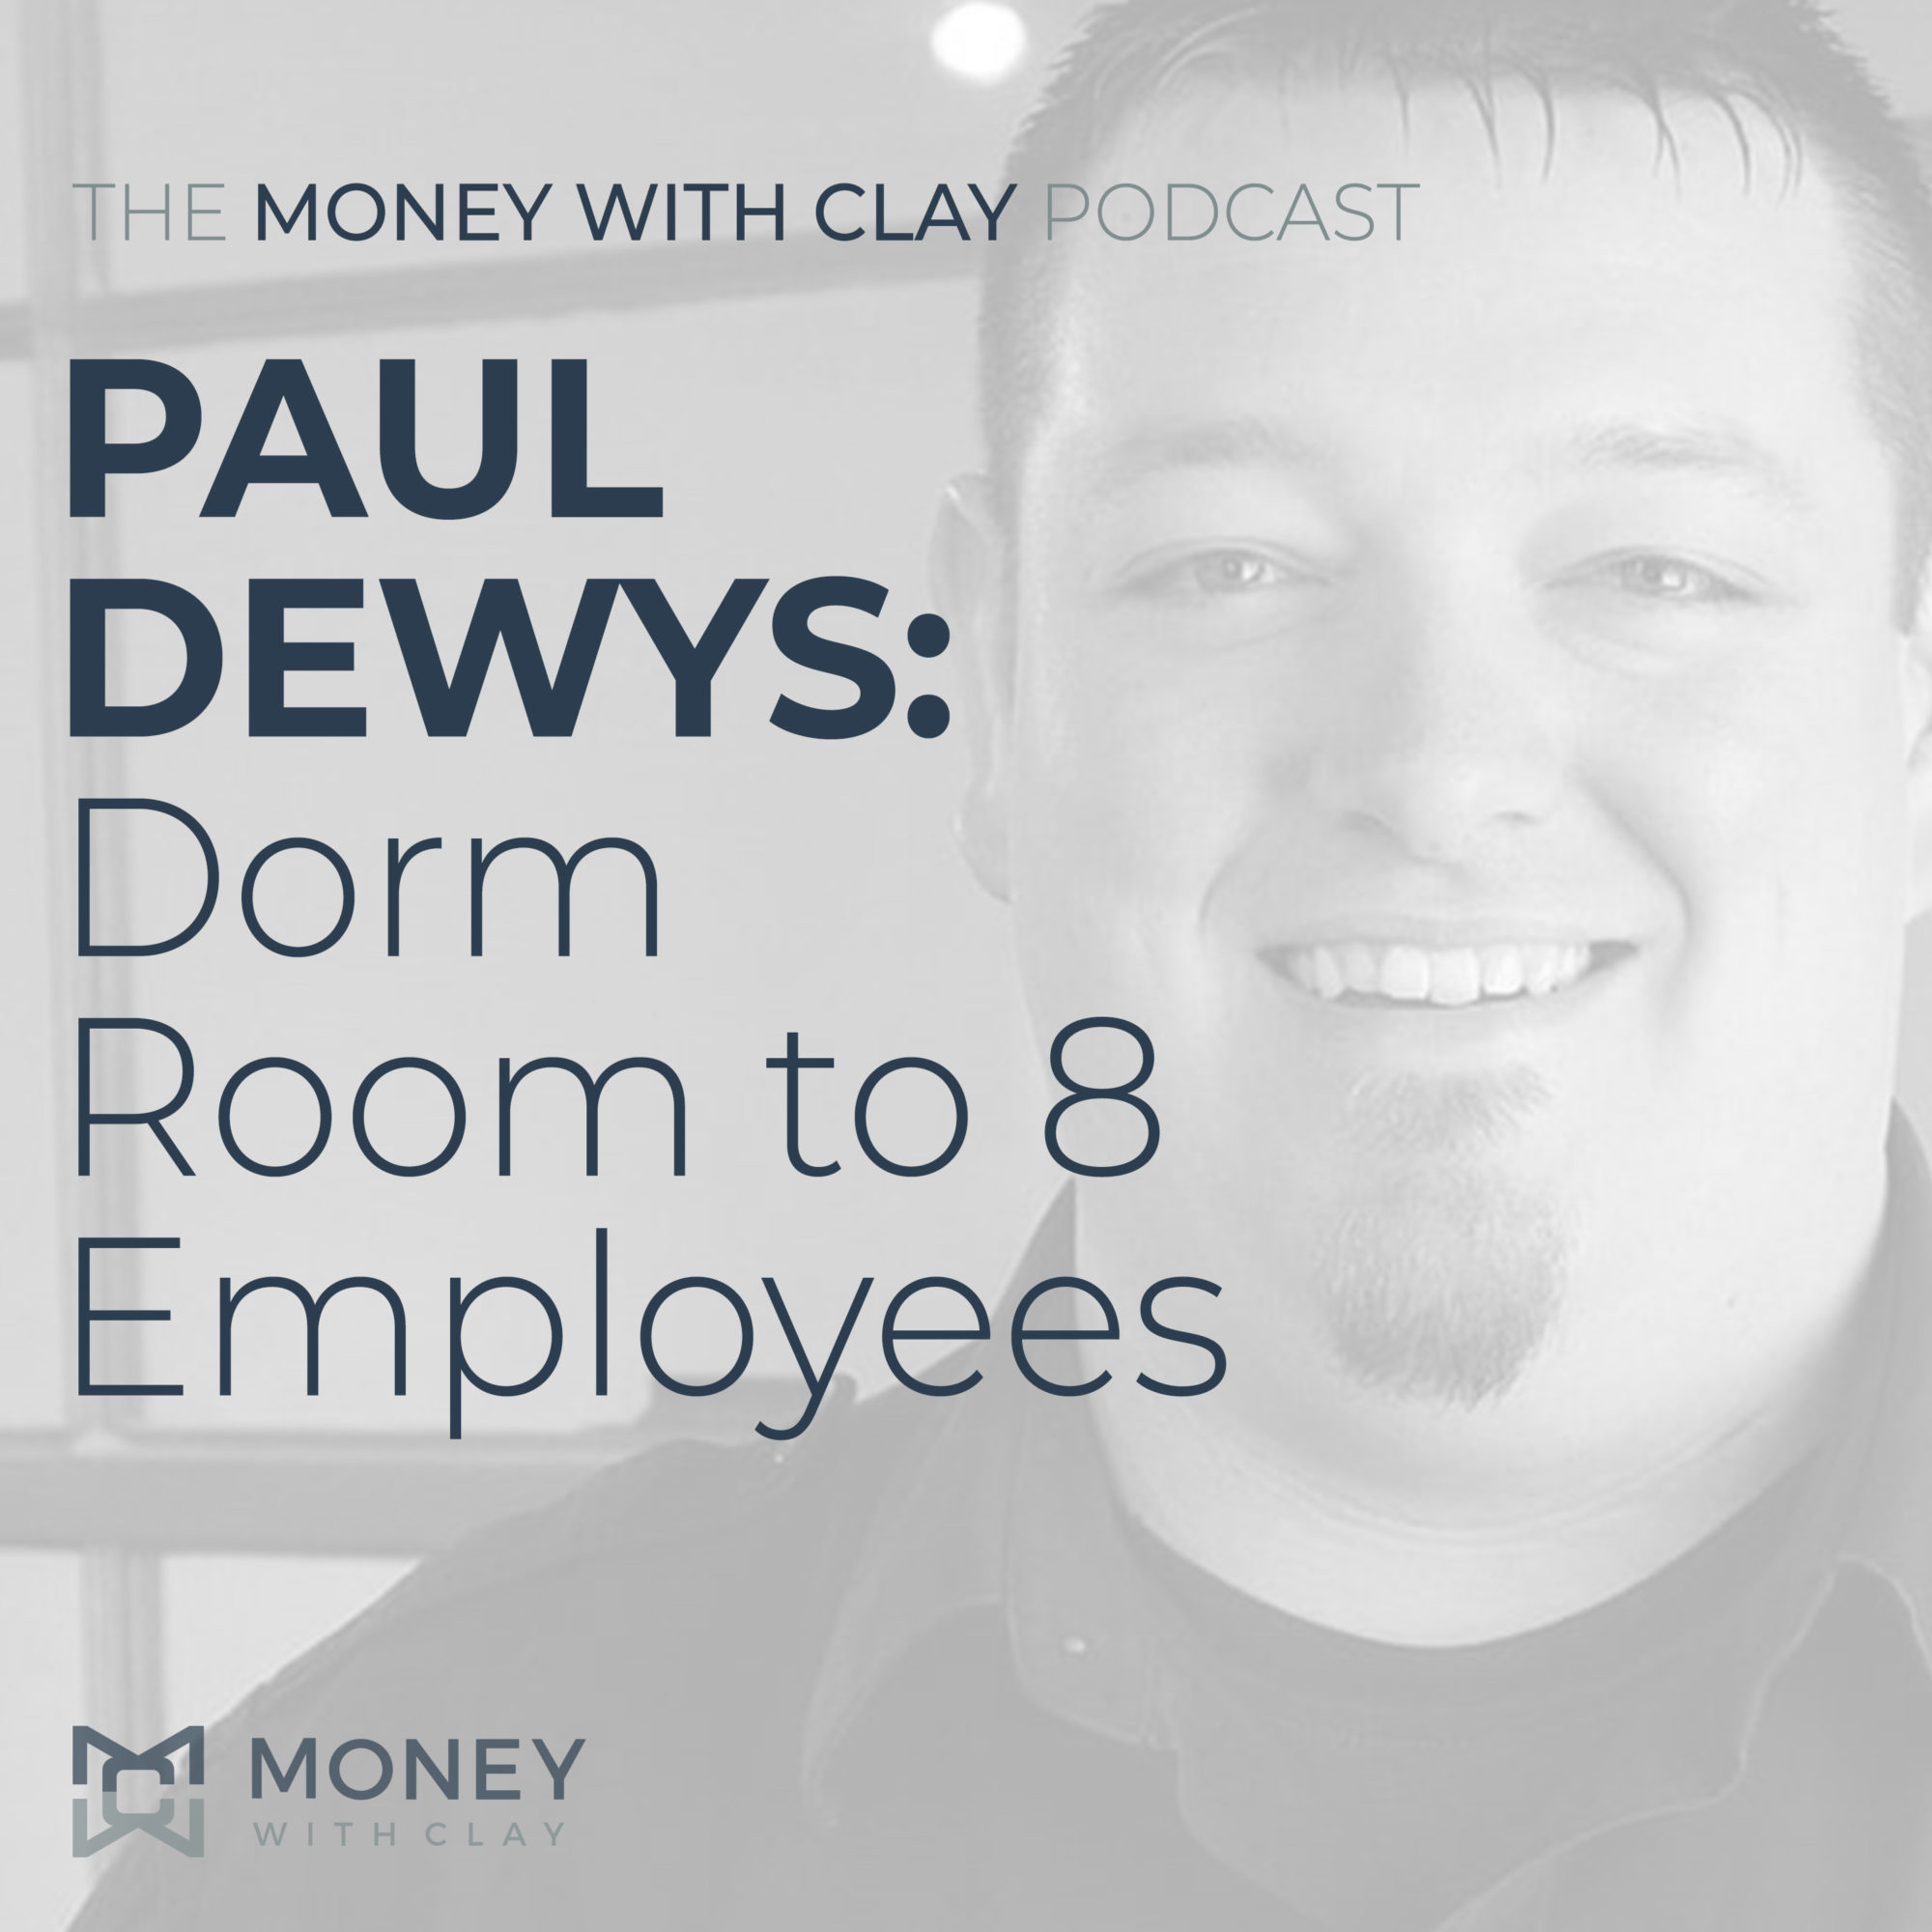 Paul DeWys: Dorm Room to 8 Employees